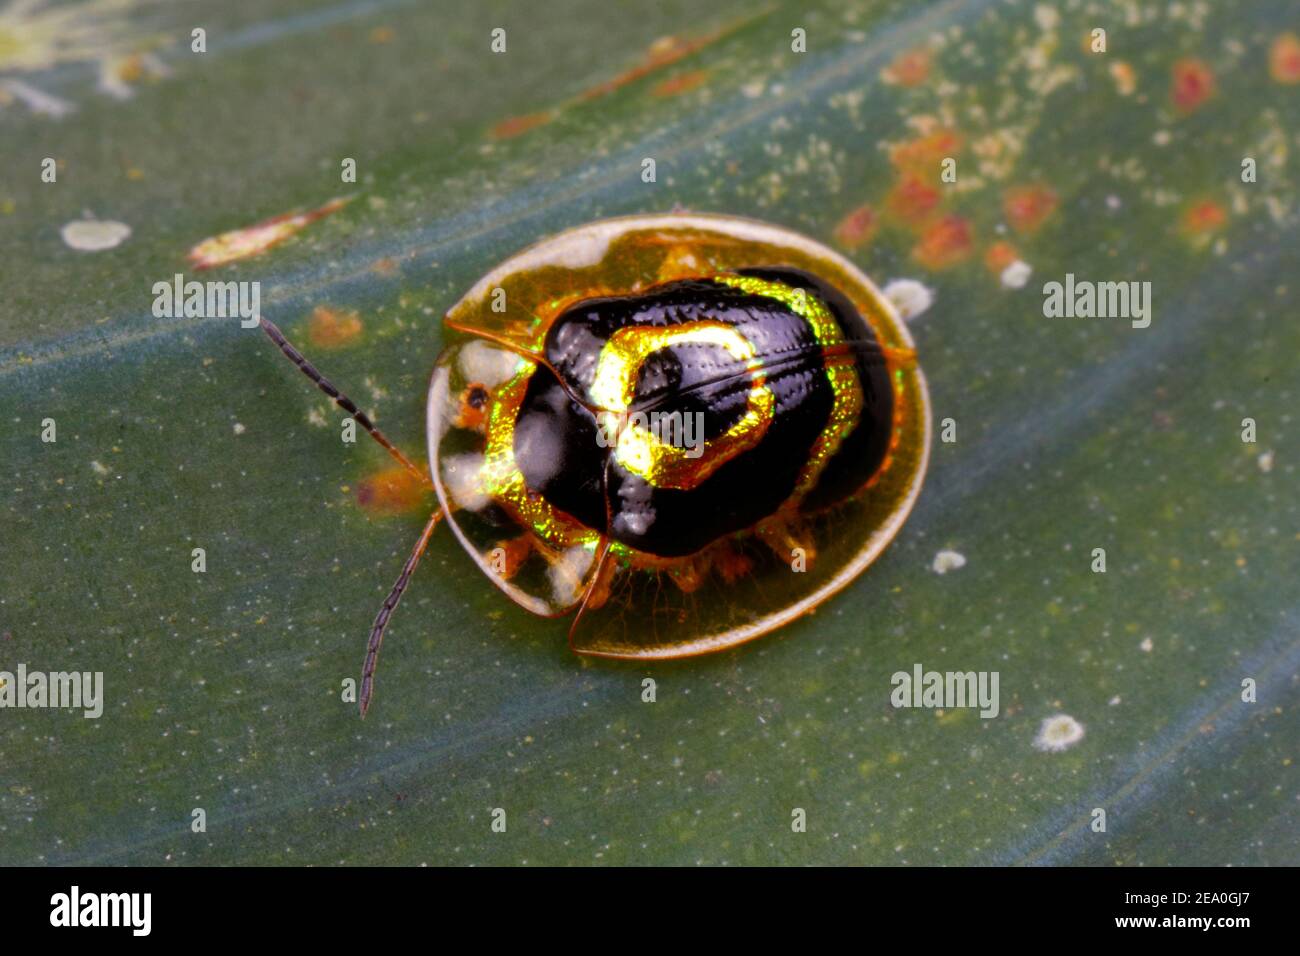 A Target Tortoise Beetle, Ischnocodia annulus, crawling on a leaf. Stock Photo